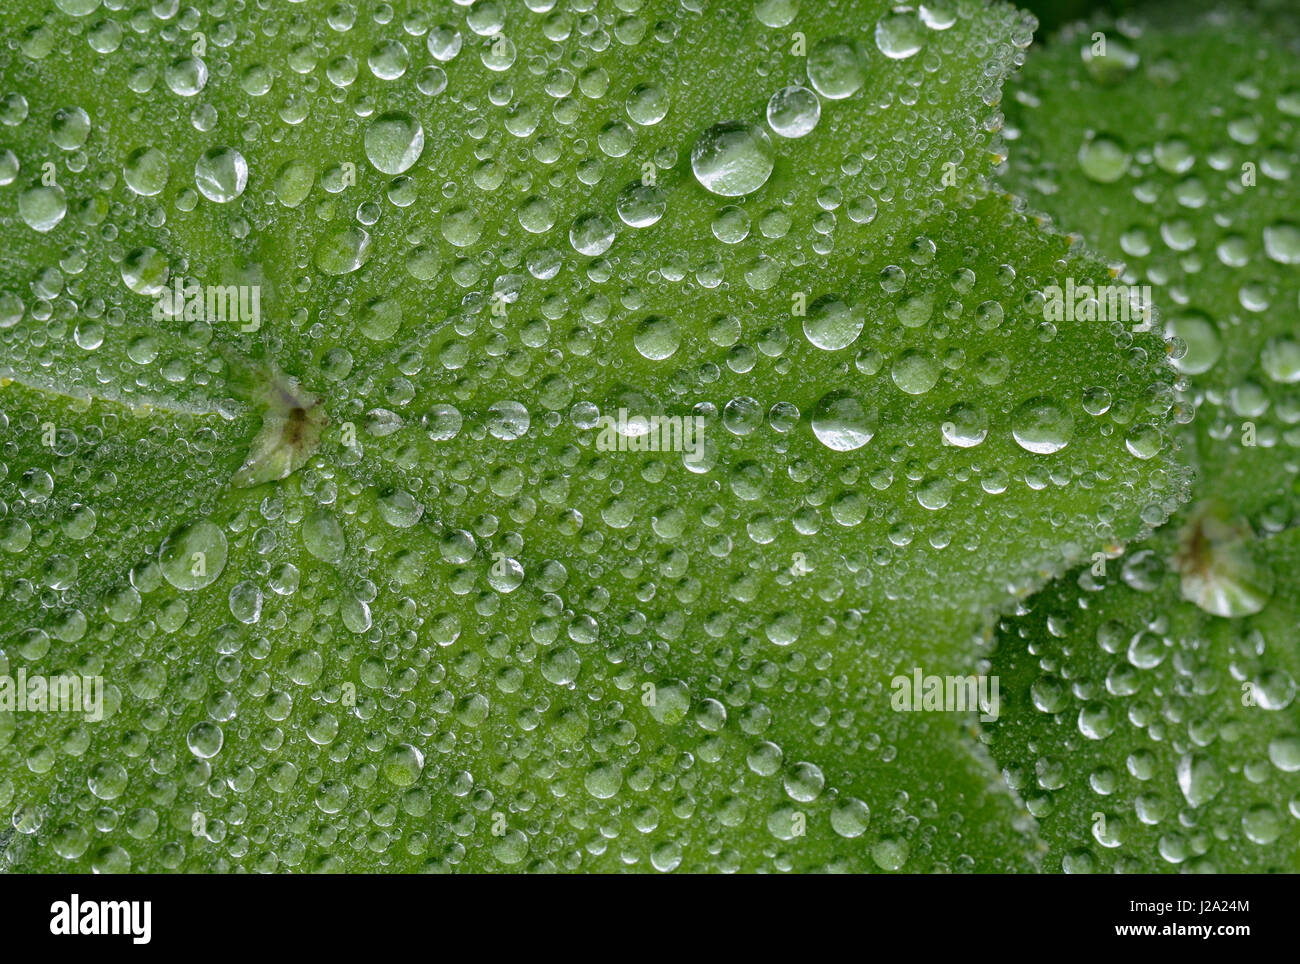 Raindrops on Lady's Mantle leaves Stock Photo